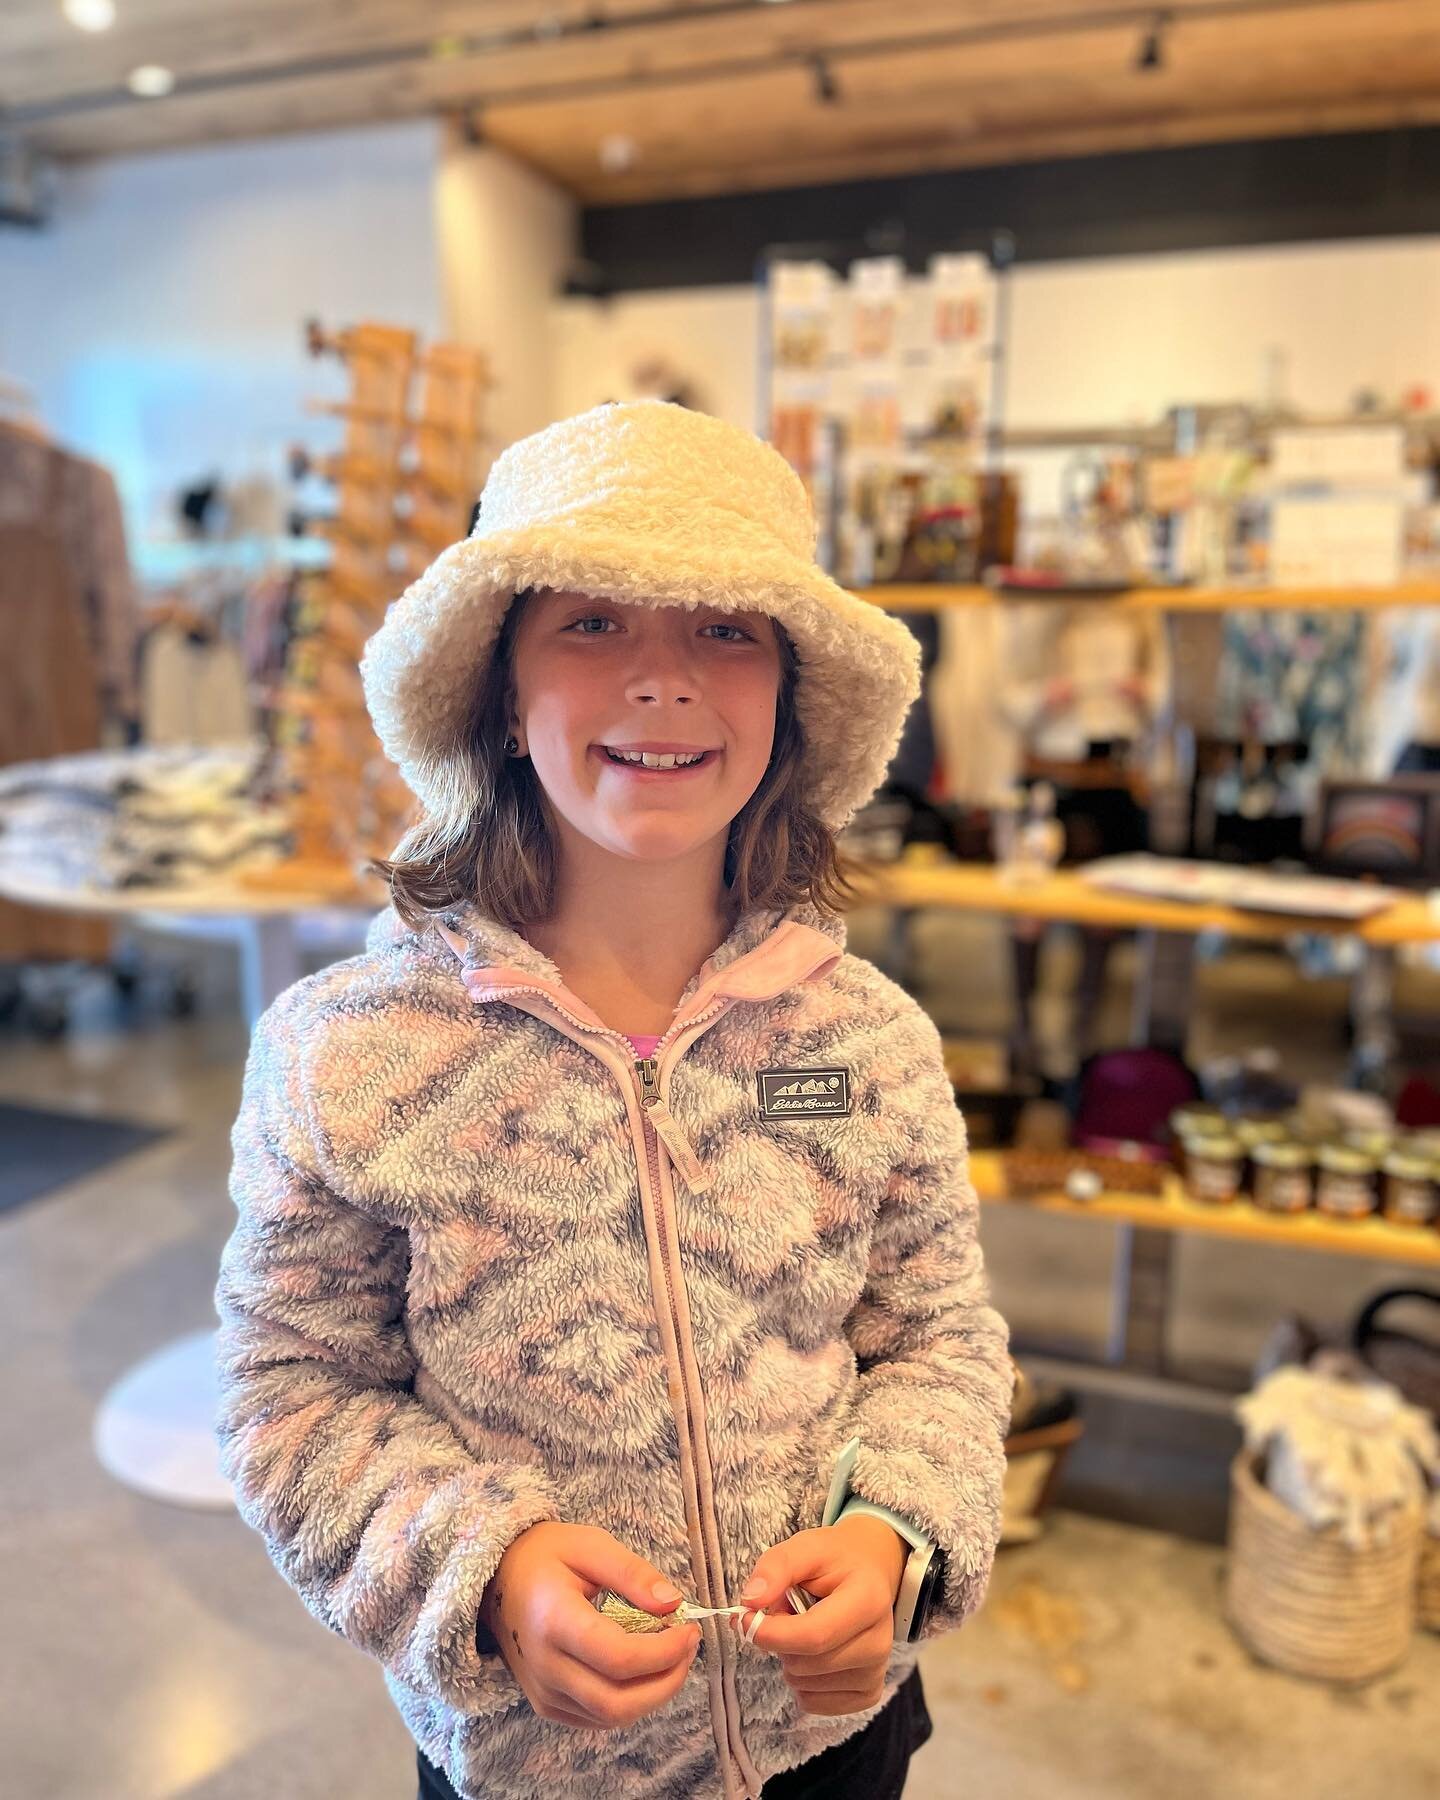 This cutie pie found the hat to end all hats! Find something for everyone at MonkeyLove.

Open daily, 11am-6pm

#mountaintownlife #smallbusiness #womeninbusiness #adventurealways #visitmccall #shoppinginmccall #mccallidaho #shoplocal #shopidaho #shop